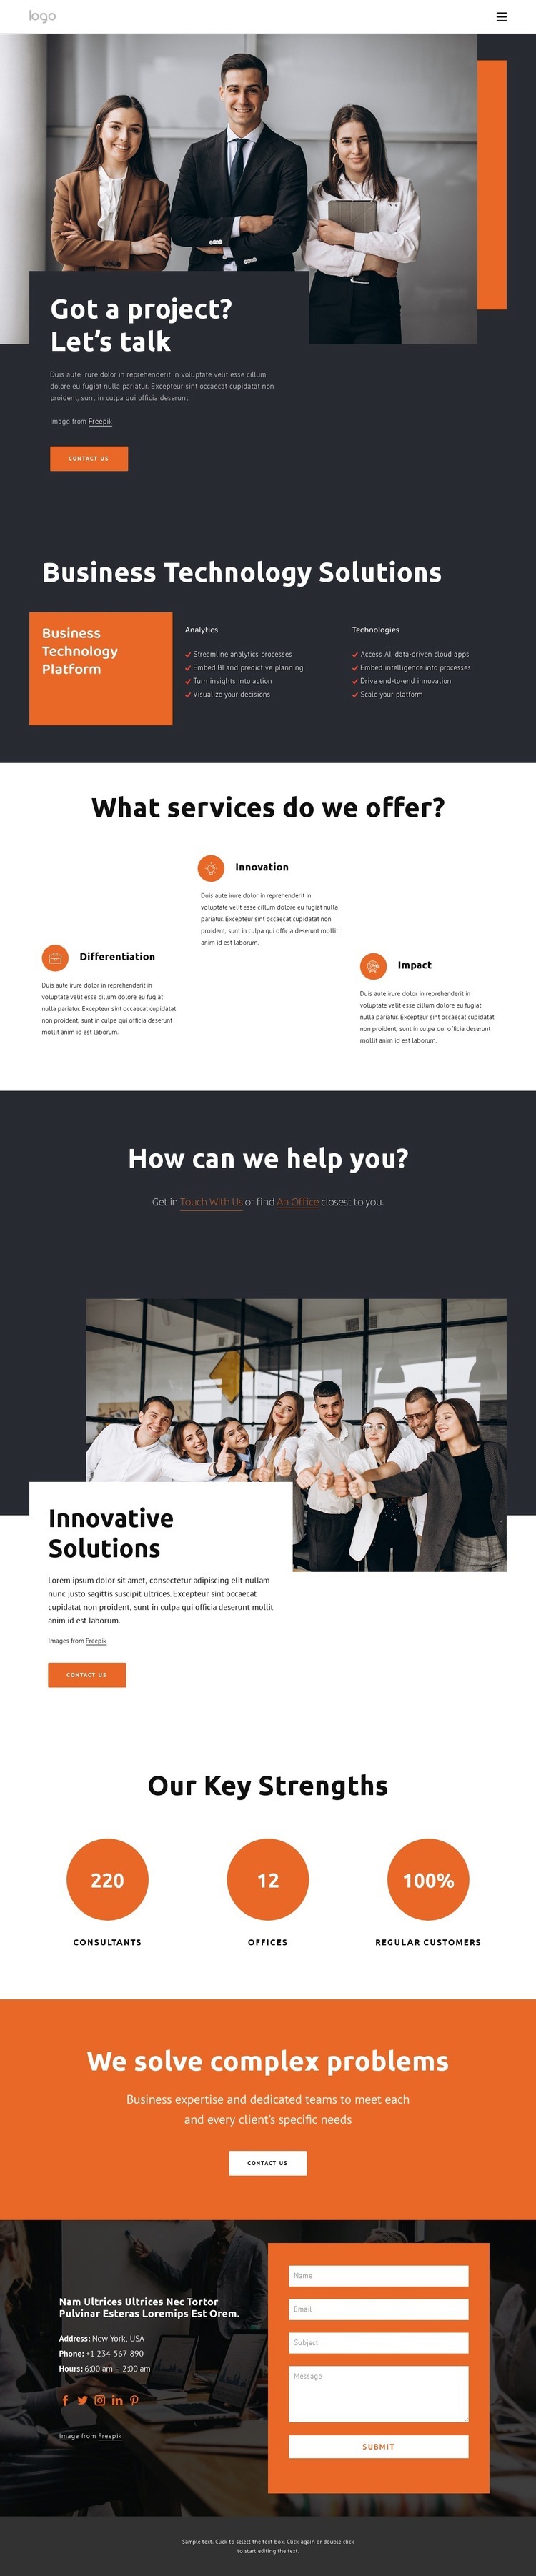 One of the best-known firms Homepage Design